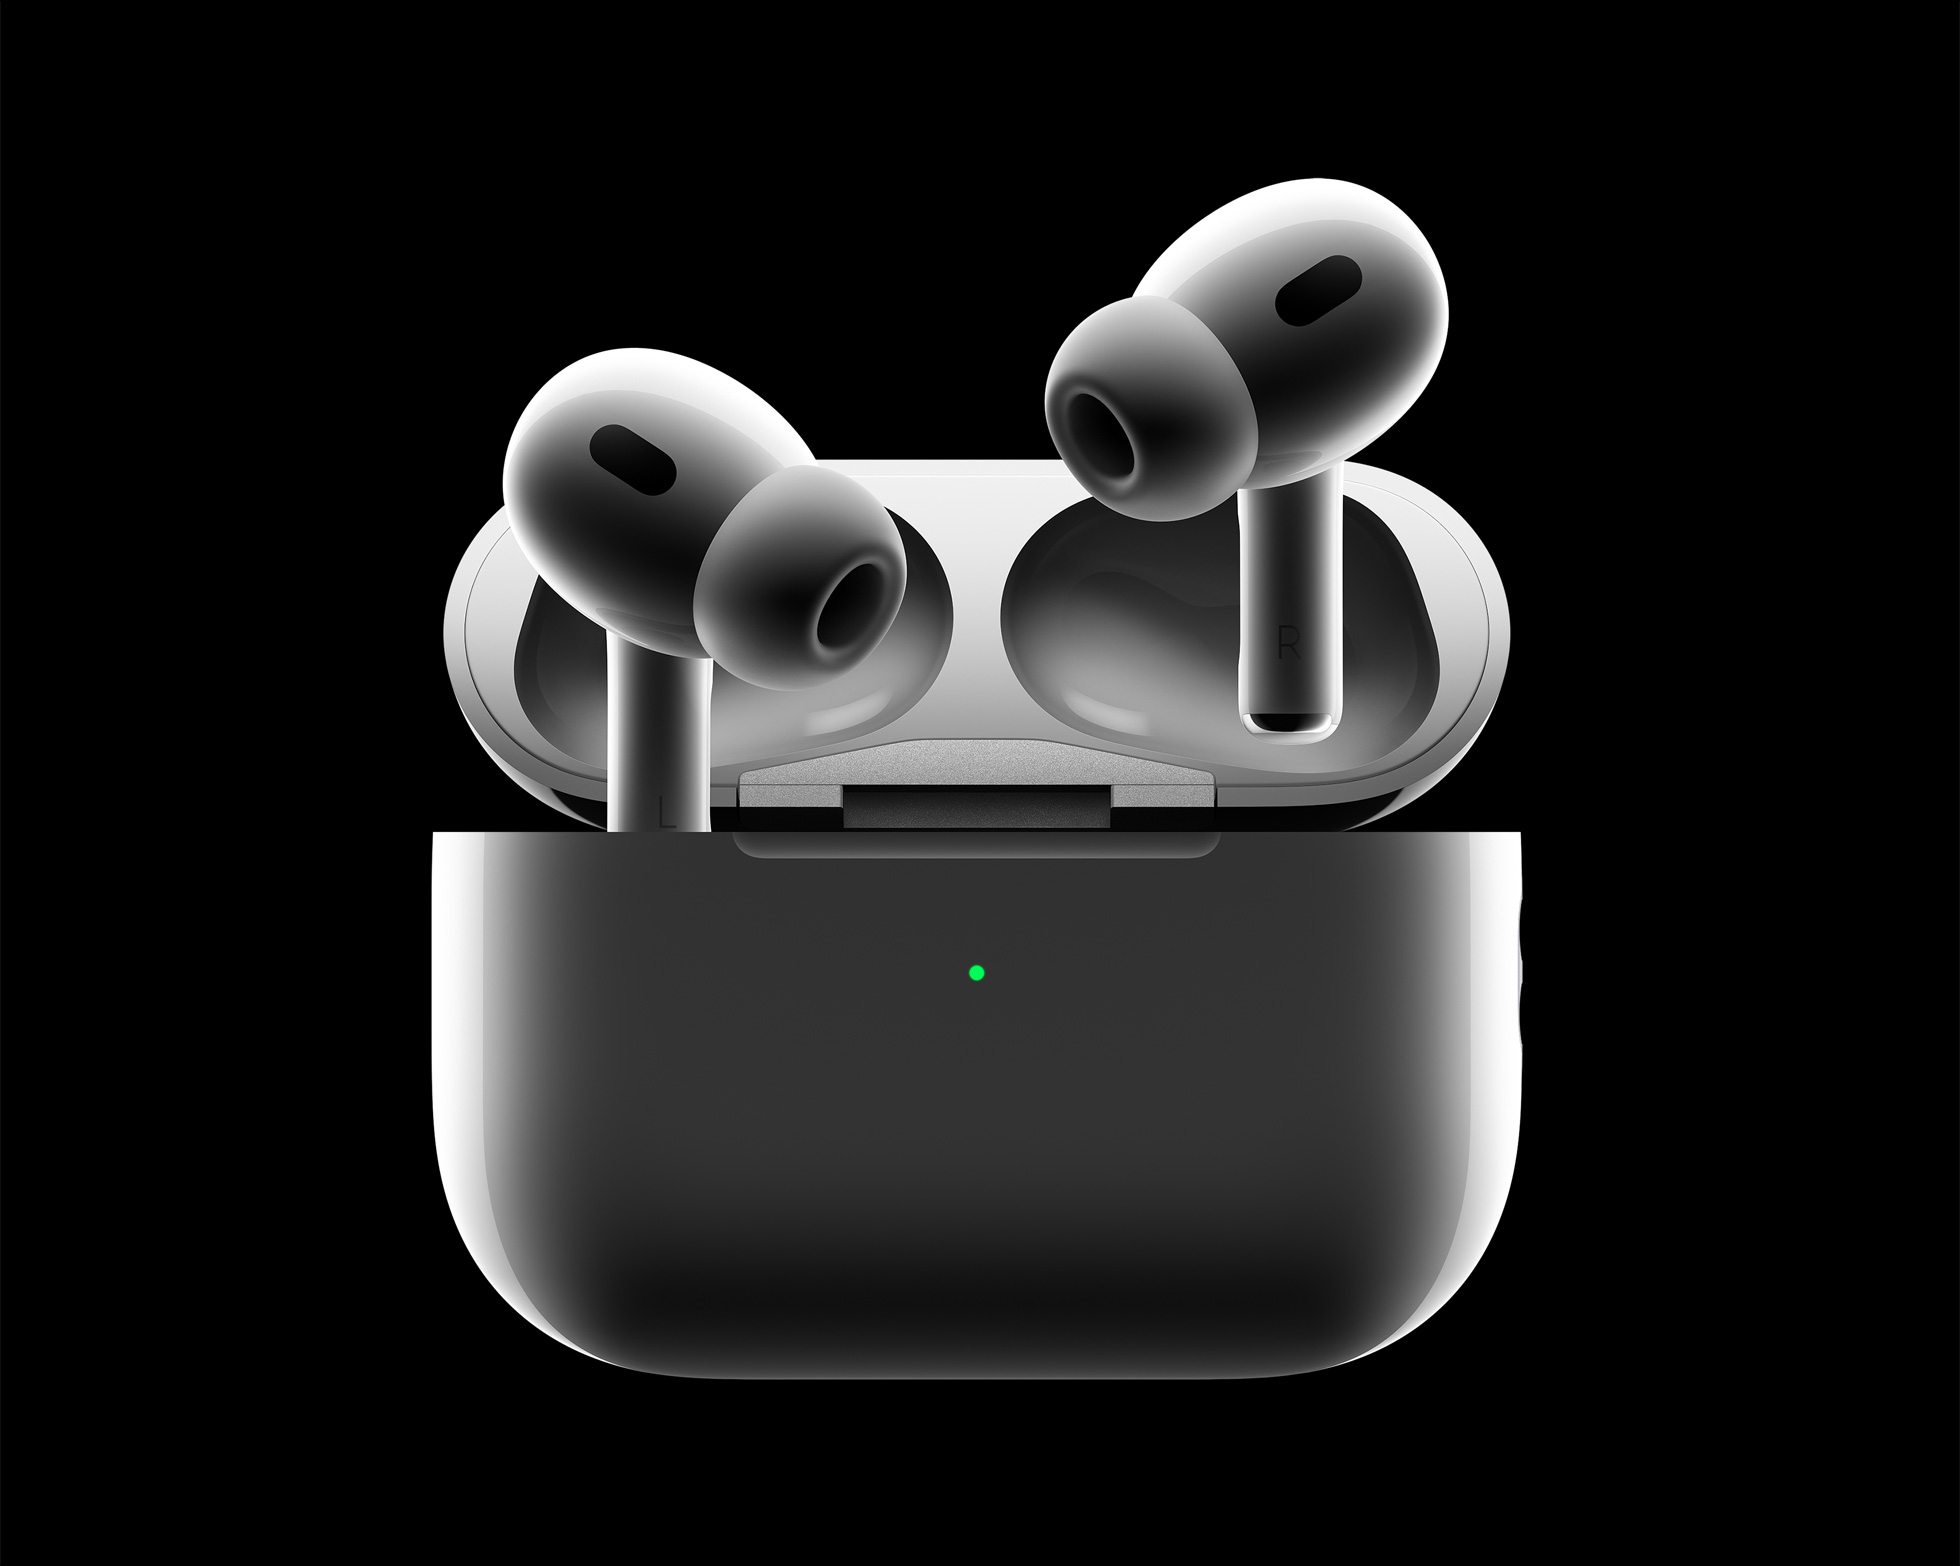 Apple Reportedly Dropping Affordable AirPod Lite Model